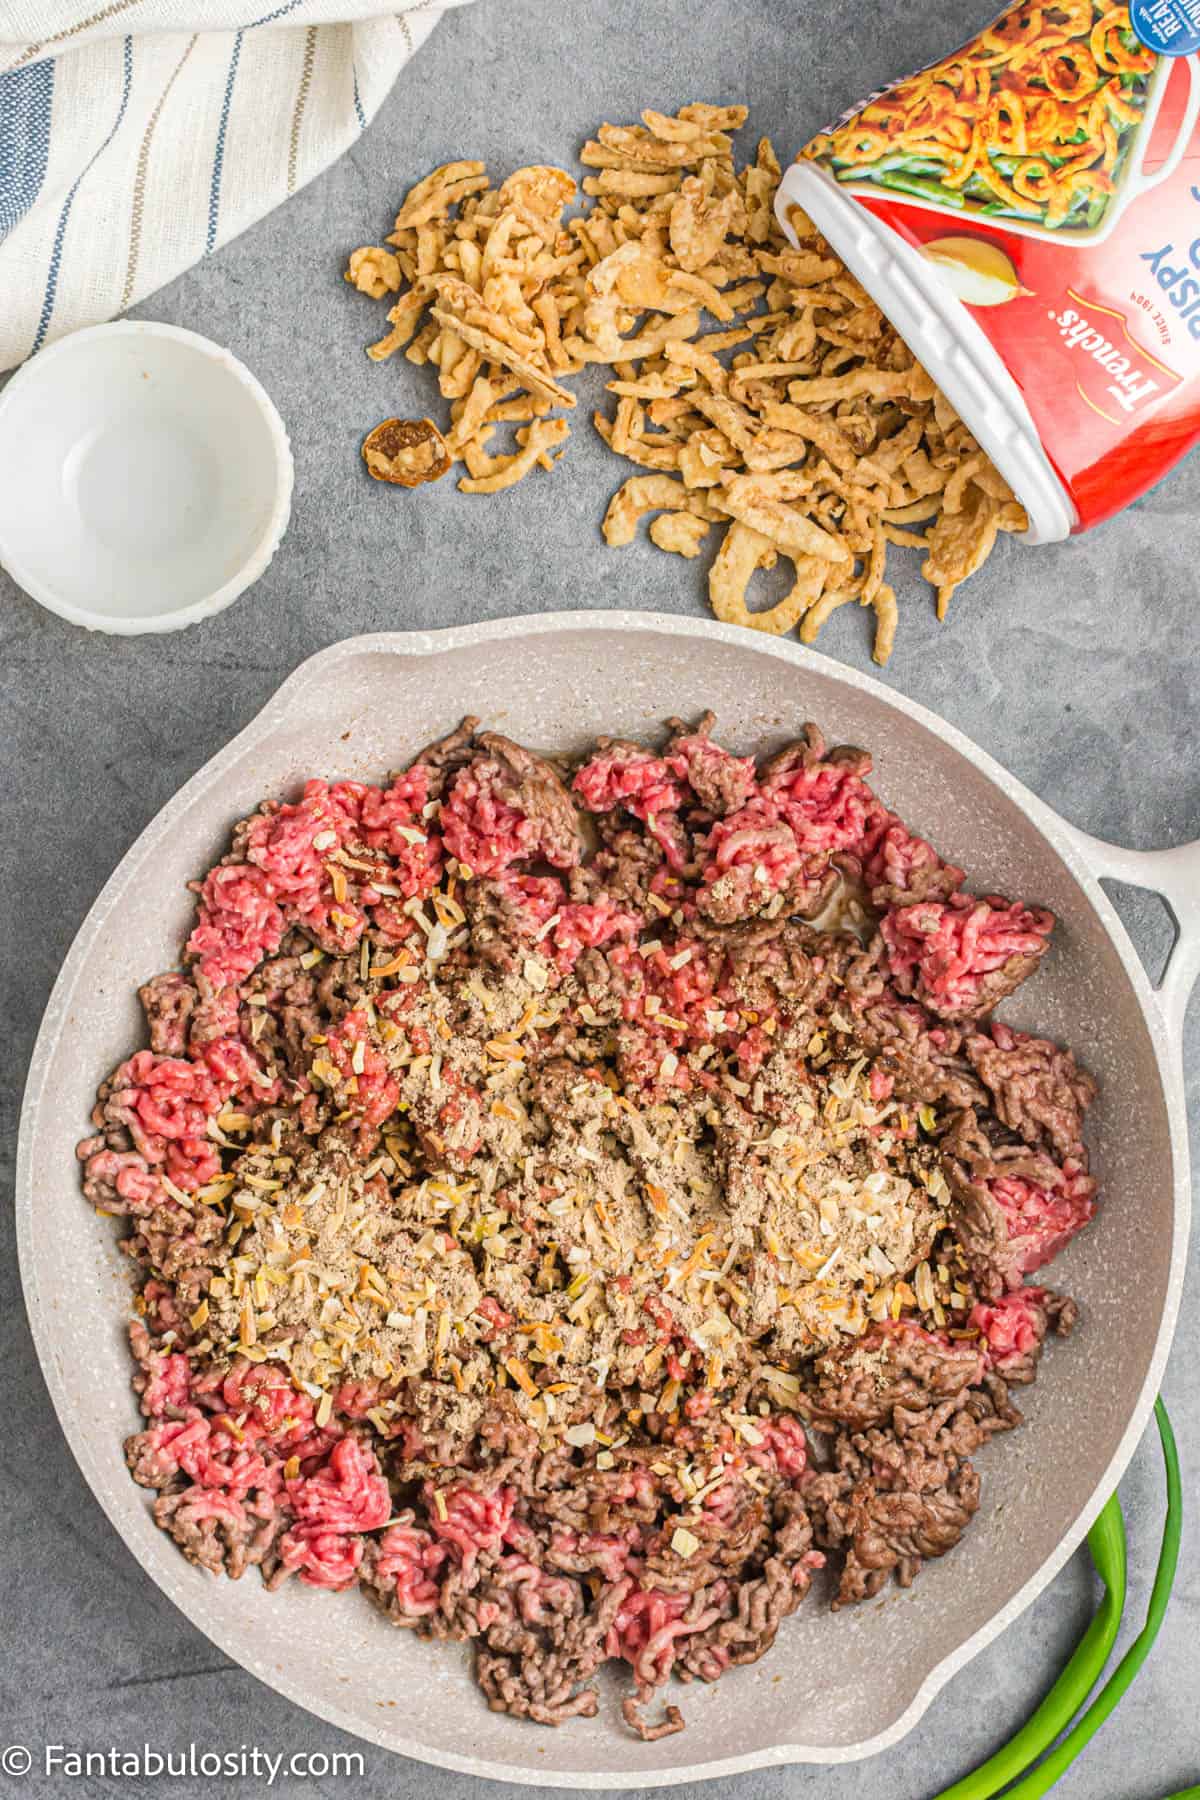 onion soup mix added to ground beef